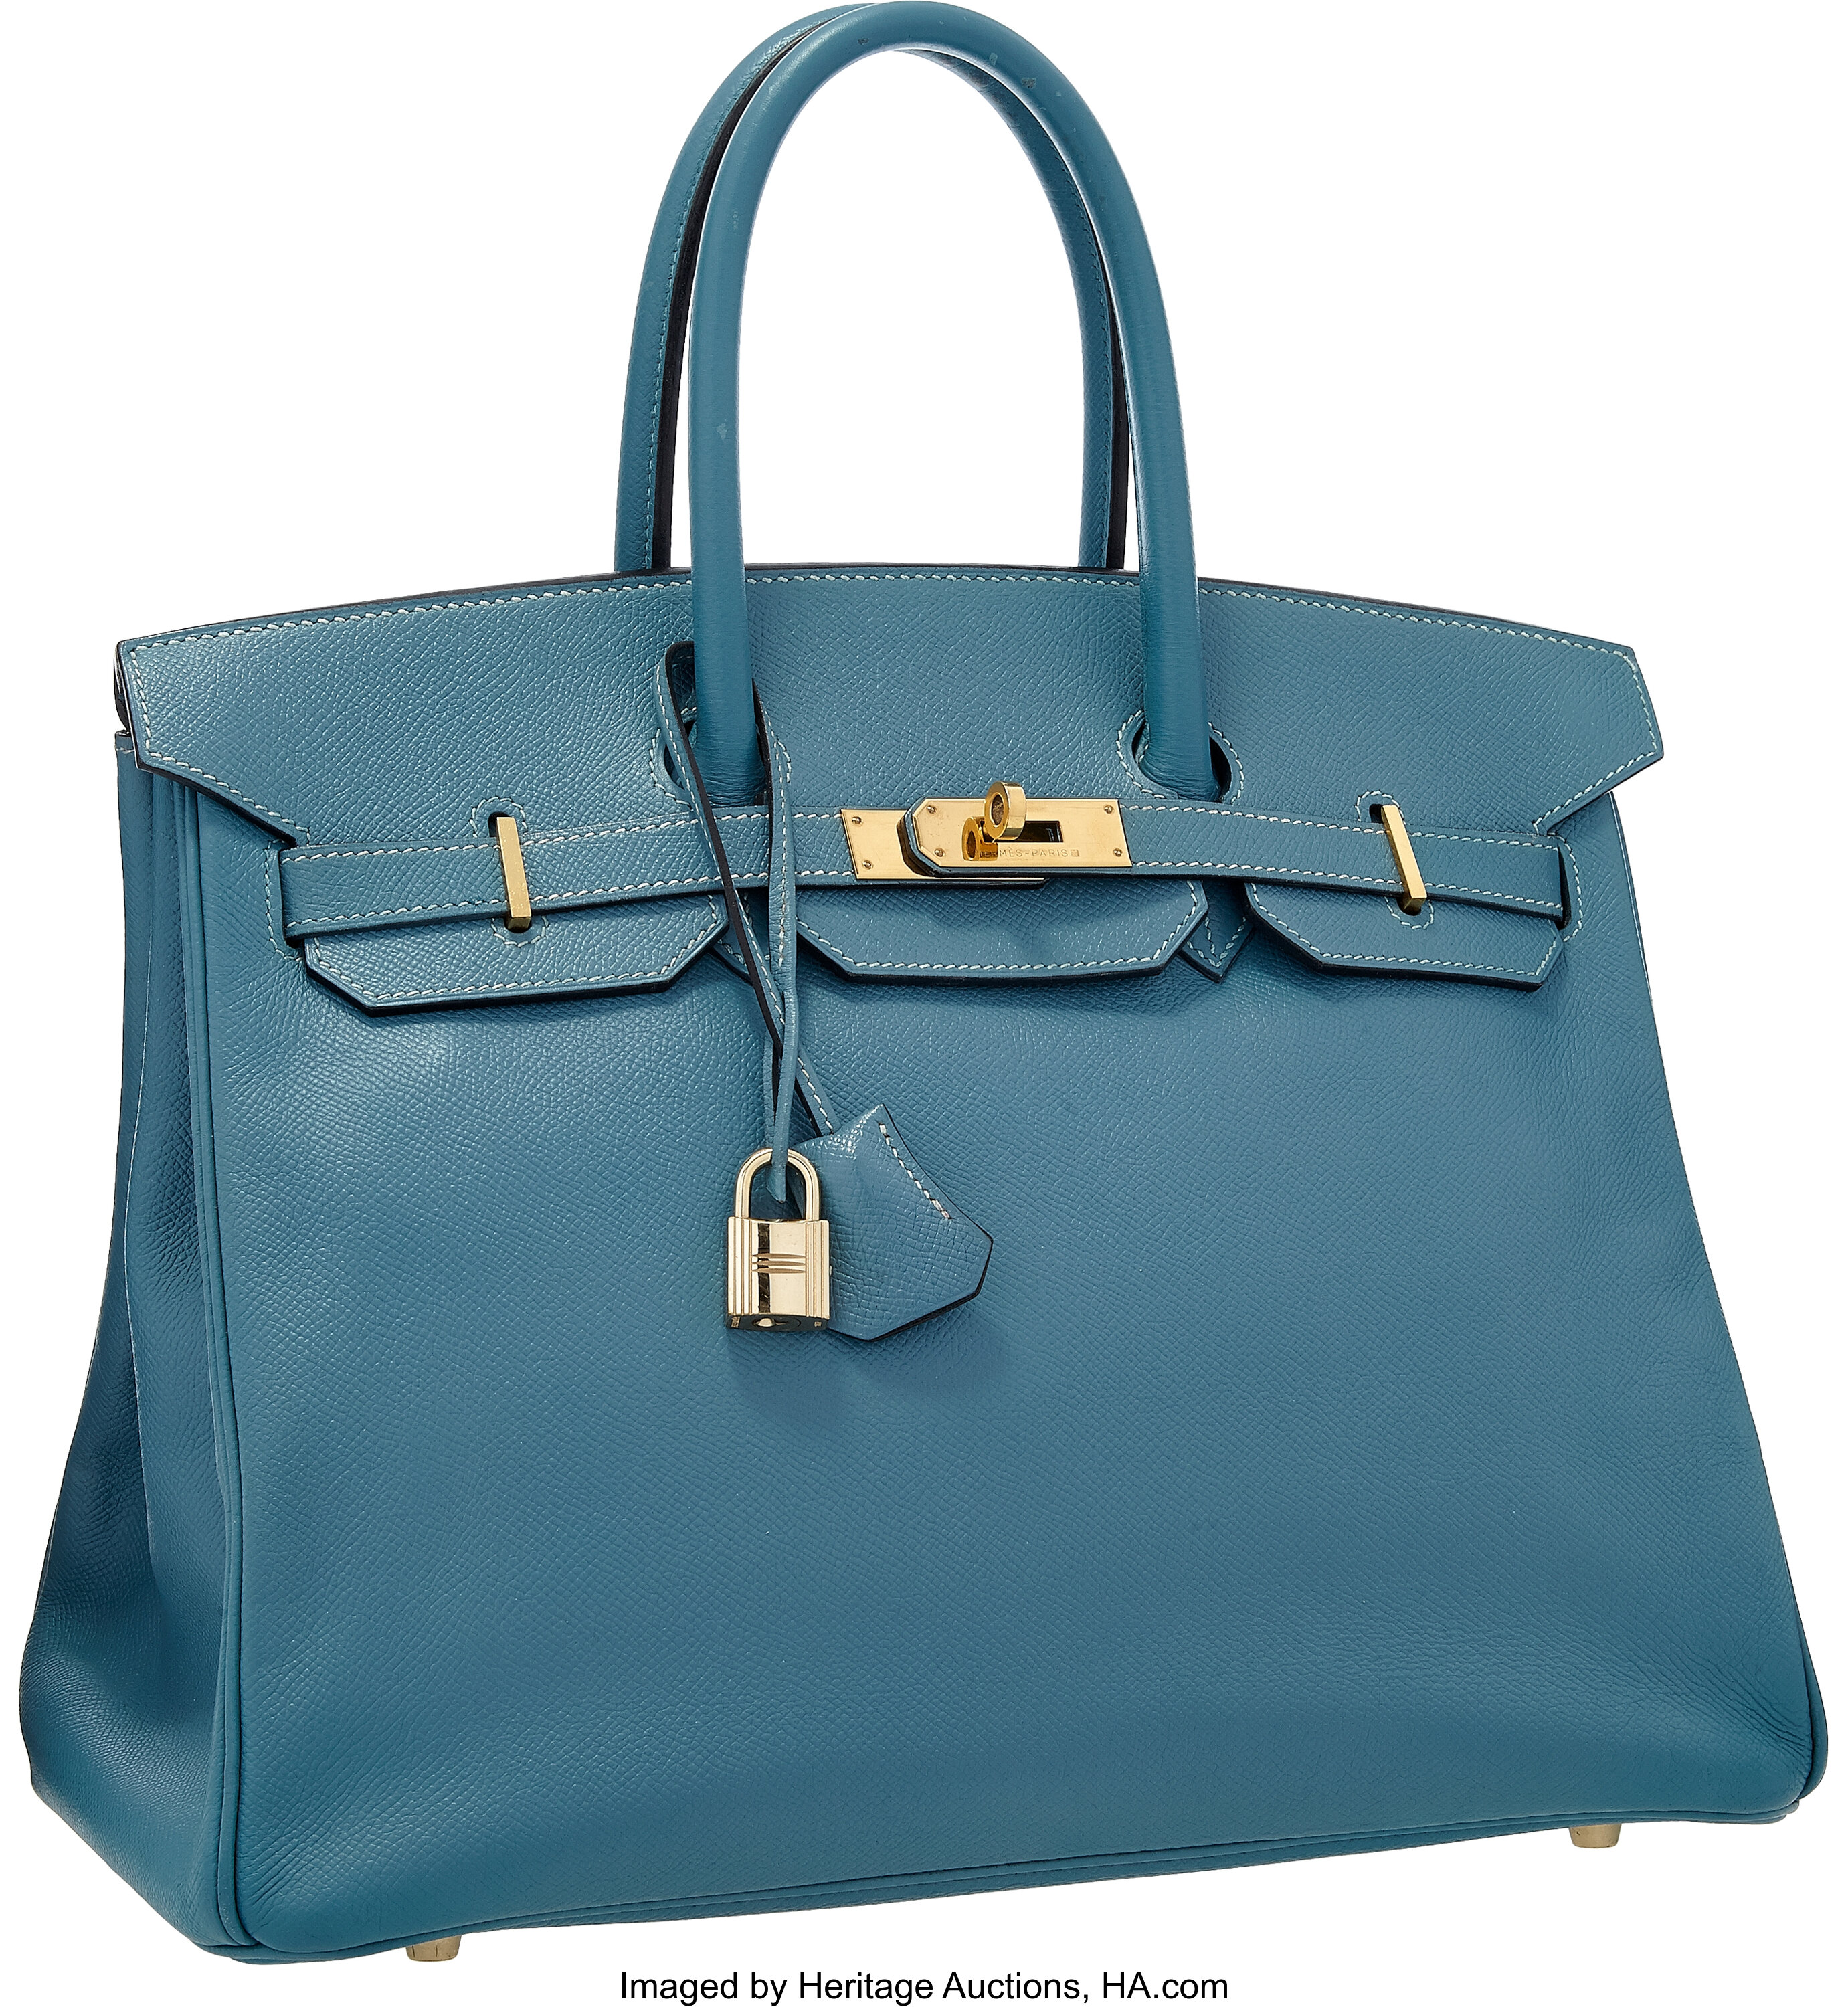 Hermes 35cm Blue Jean Courchevel Leather Birkin Bag with Gold, Lot #58017